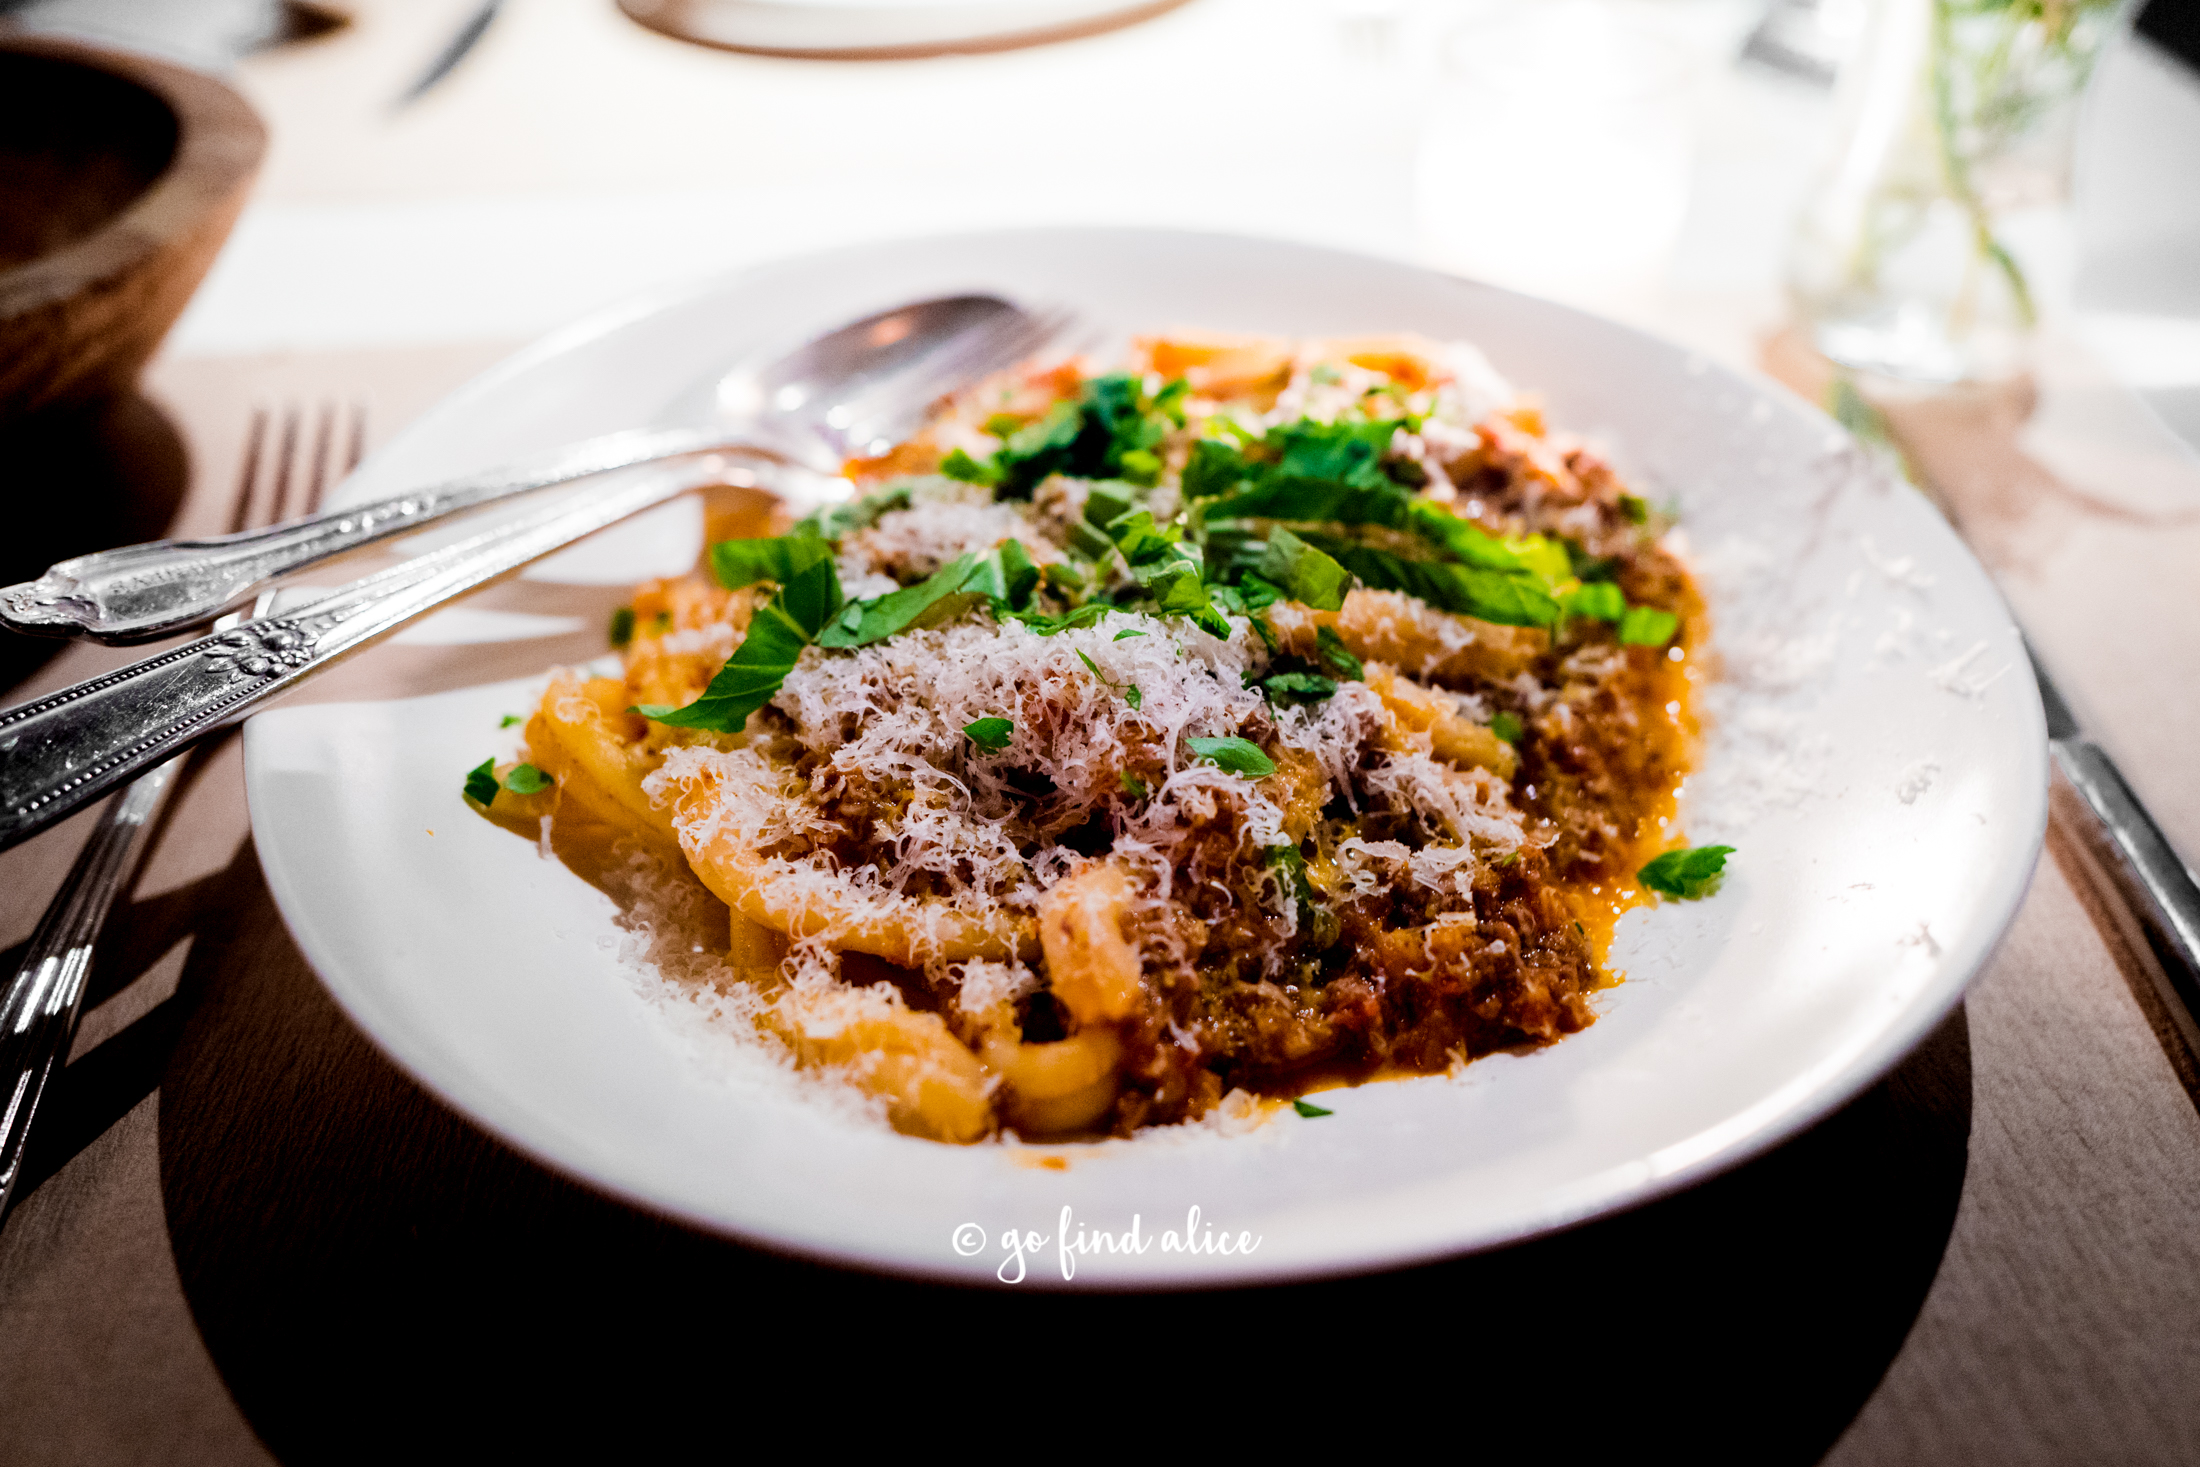 Strozzapreti with spicy bolognese and herbs ($29)